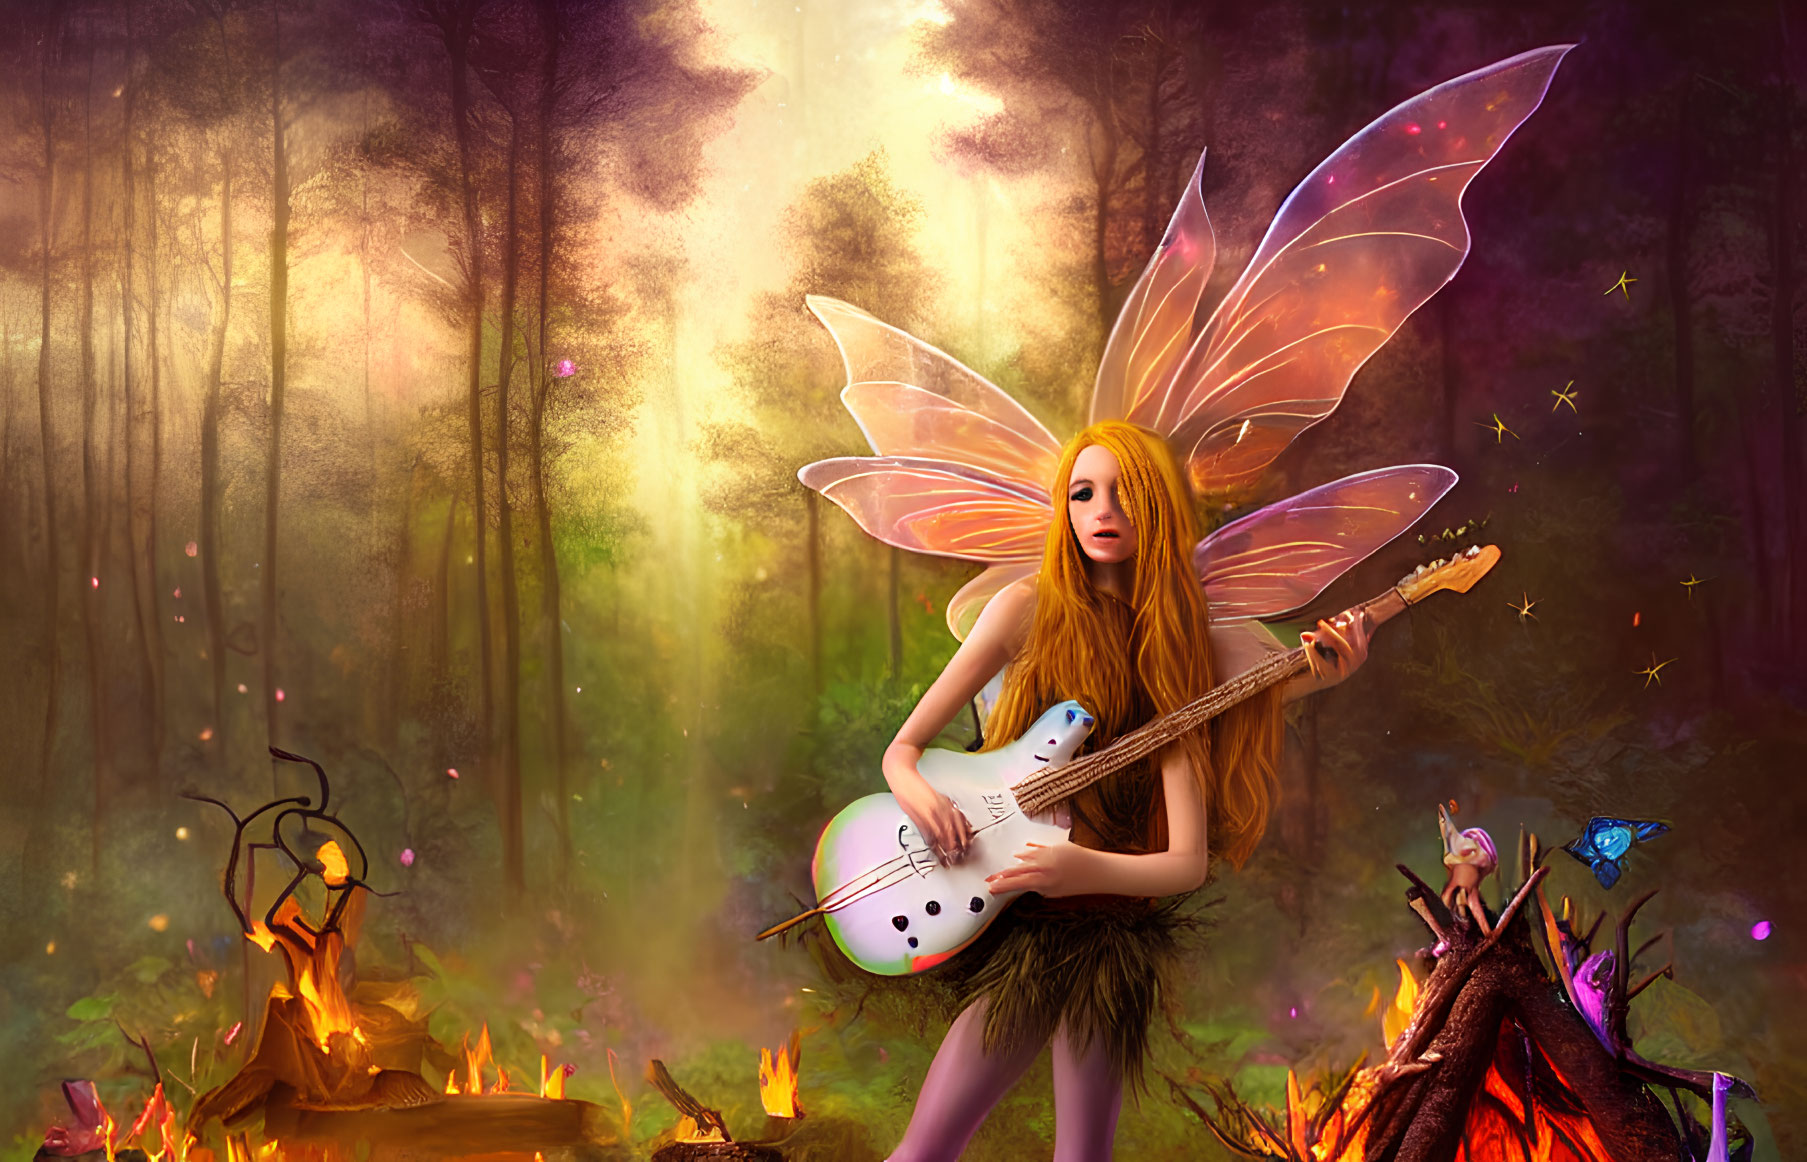 Translucent-winged fairy with fiery red hair playing lute in mystical forest